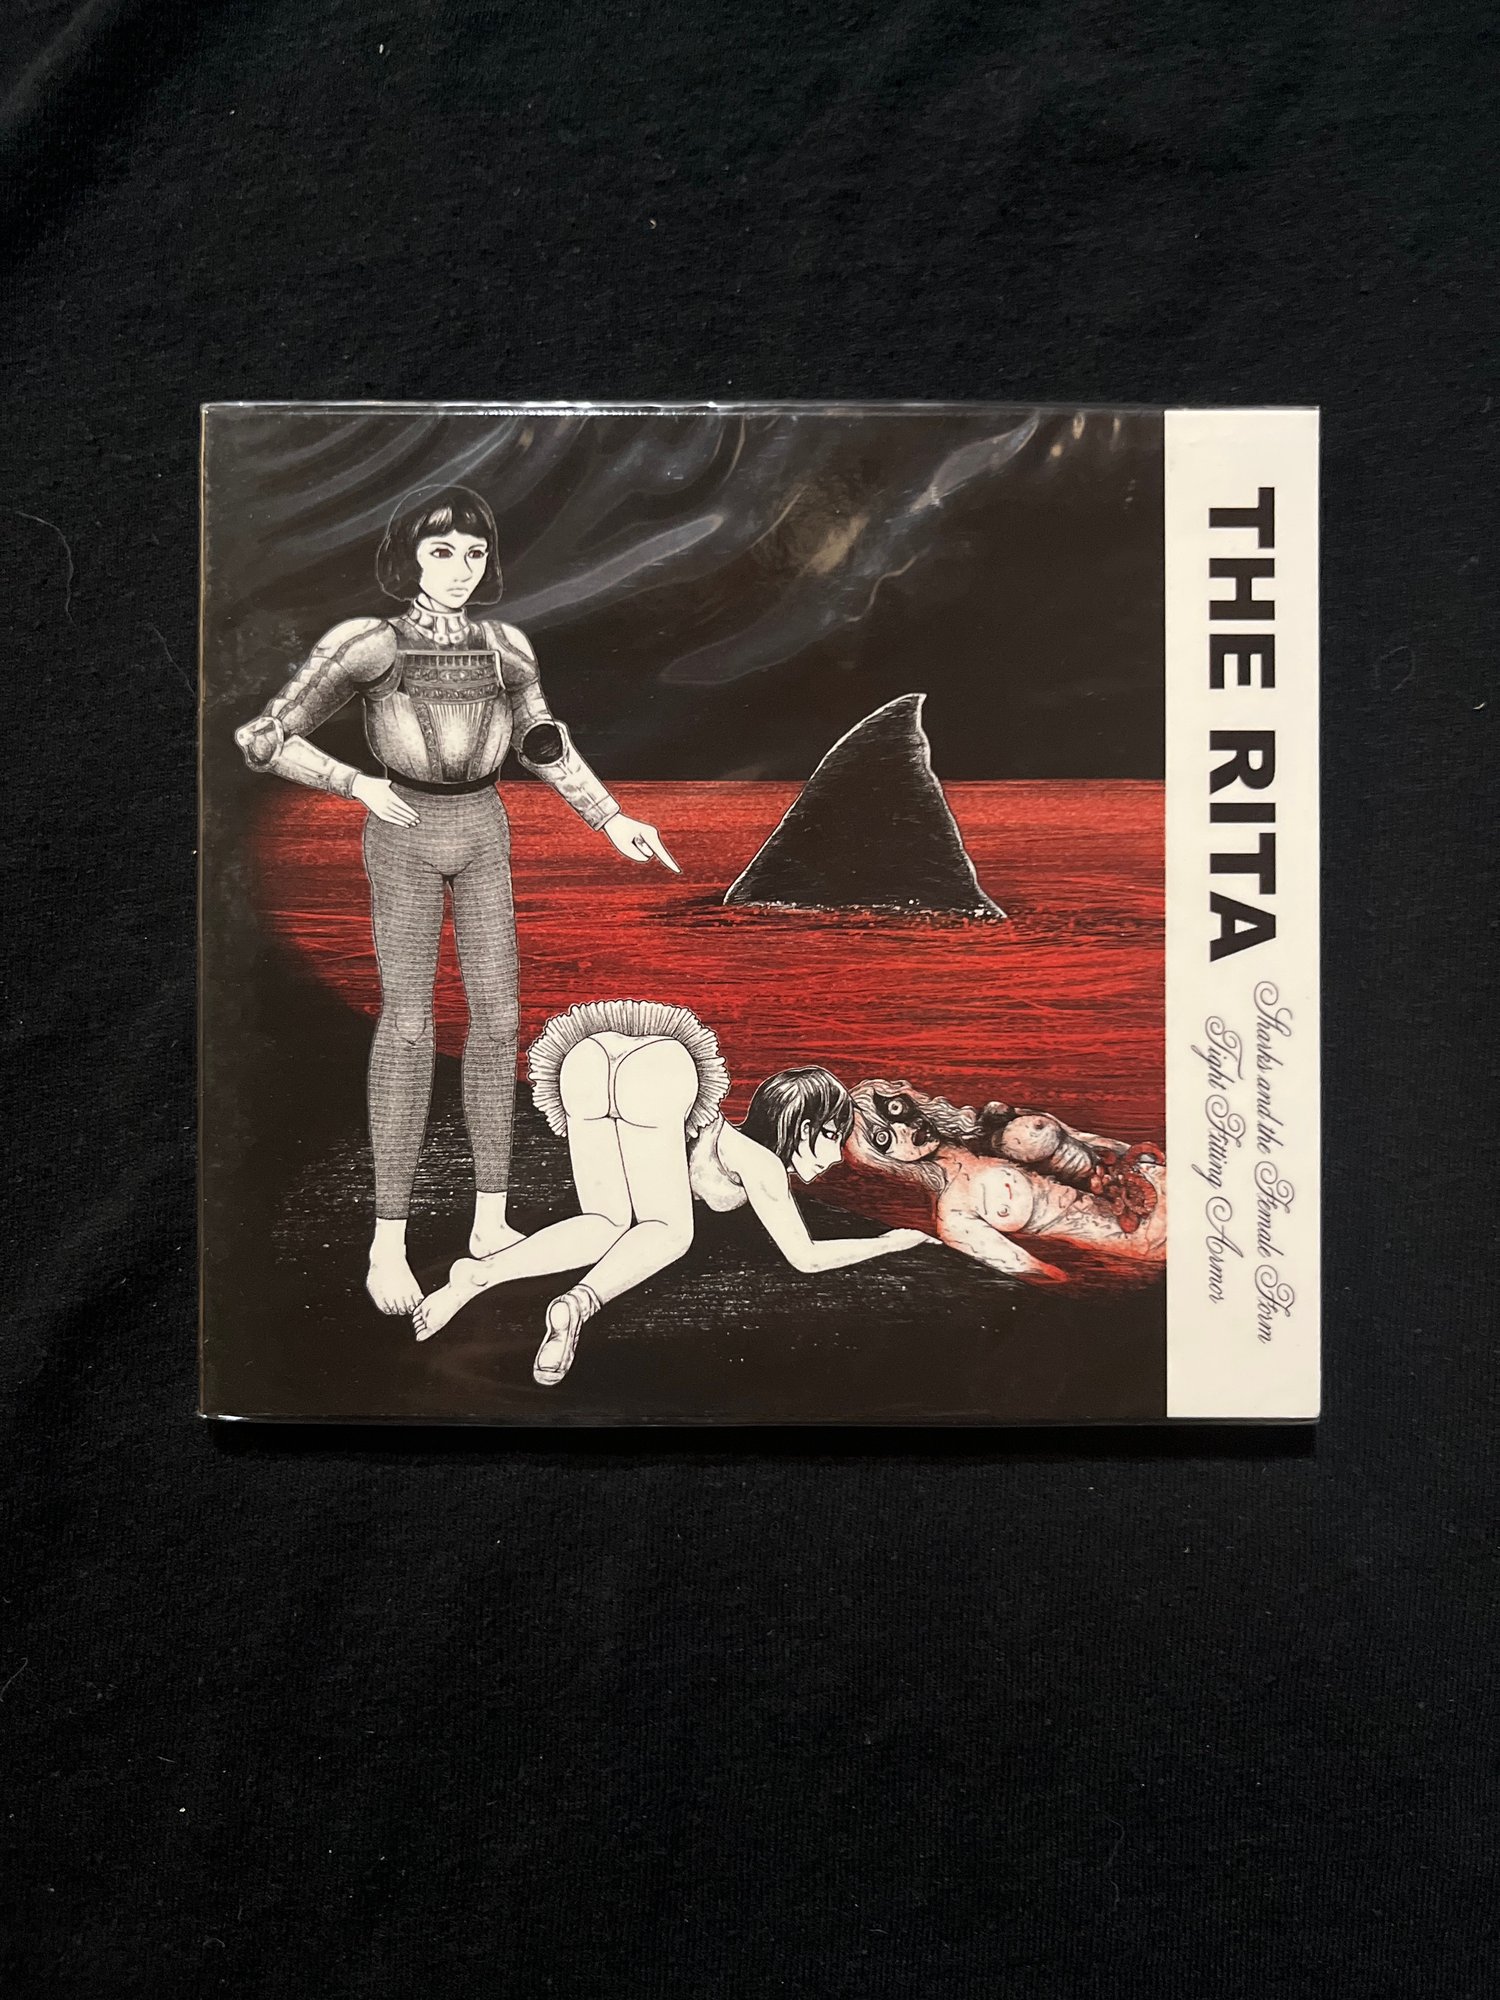 The Rita - Sharks And the Female Form/Tight Fitting Armor CD (OEC)